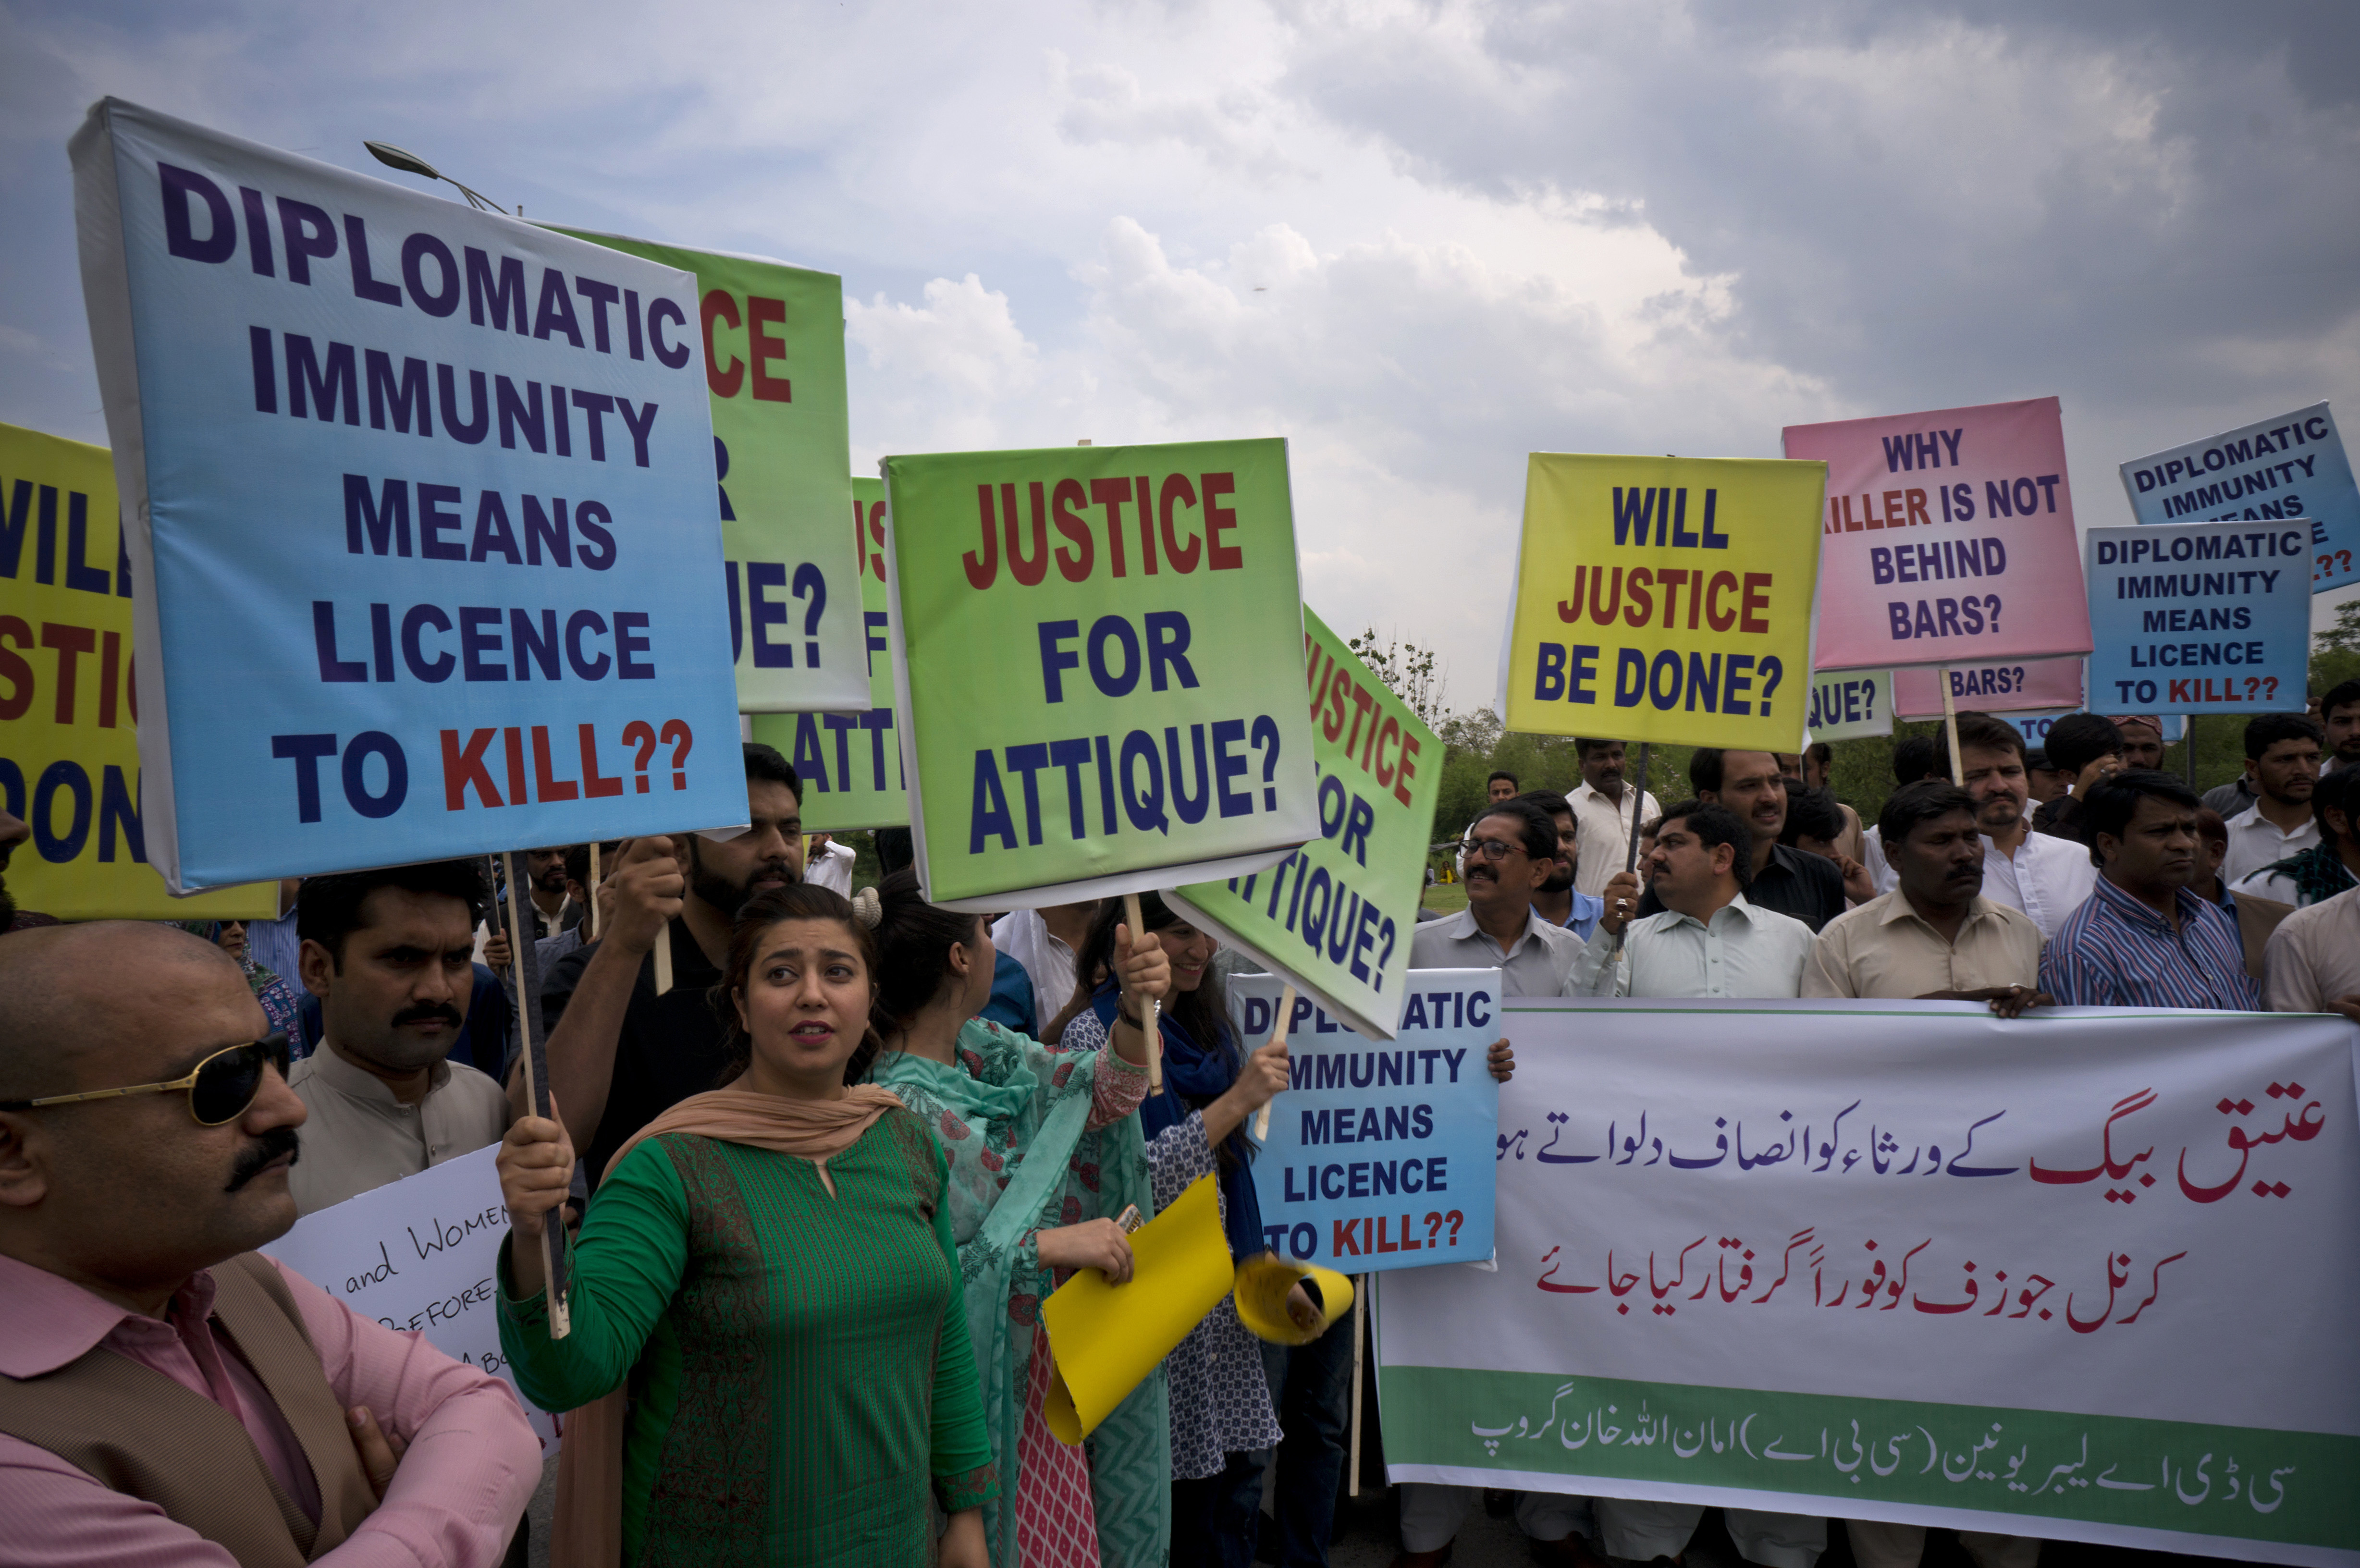 Pakistani protesters stage a rally demanding a trial for American diplomat involved in a vehicle crash that killed a person, in Islamabad, Pakistan, Tuesday, April 10, 2018. Police have requested the government impose a travel ban on an American diplomat involved in a vehicle crash over the weekend that killed one Pakistani man and injured another in the capital Islamabad. Banner reads "give justice to the family of Ateeq Baig, arrest Col. Joseph." (AP Photo/B.K. Bangash)